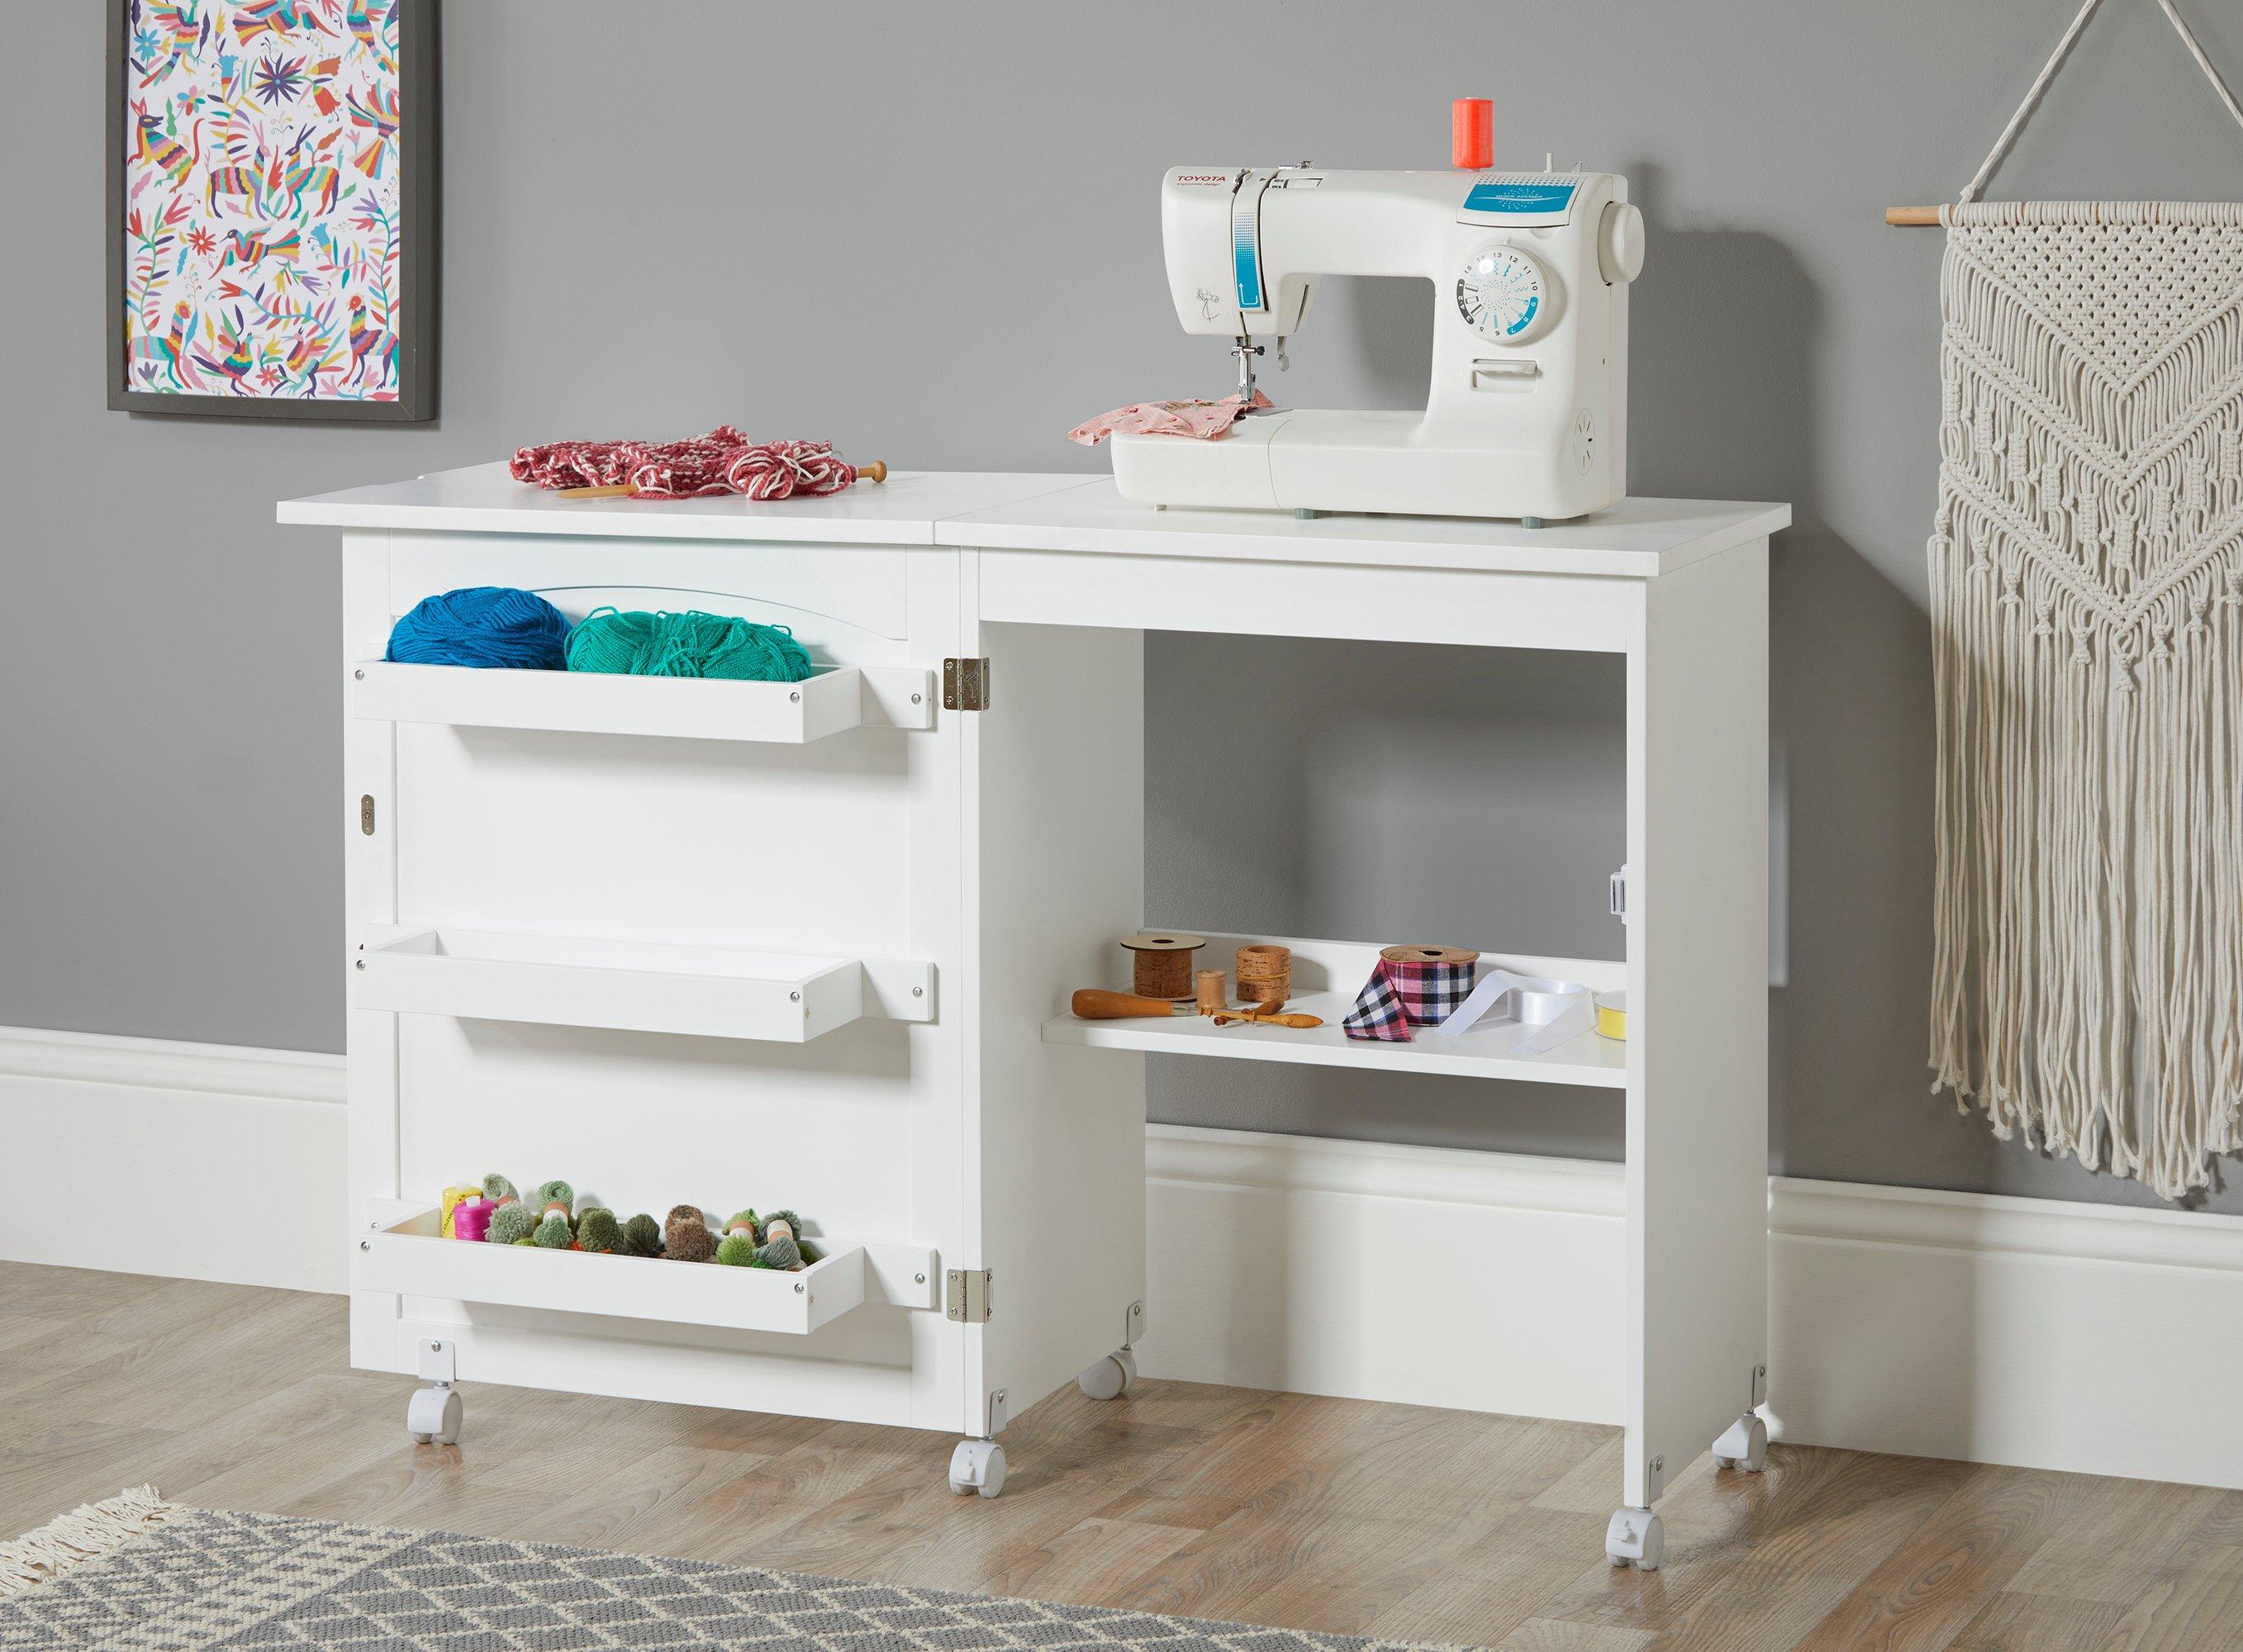 Large Foldaway Mobile Craft Sewing Table Cabinet in White Storage Craft Hobby Desk